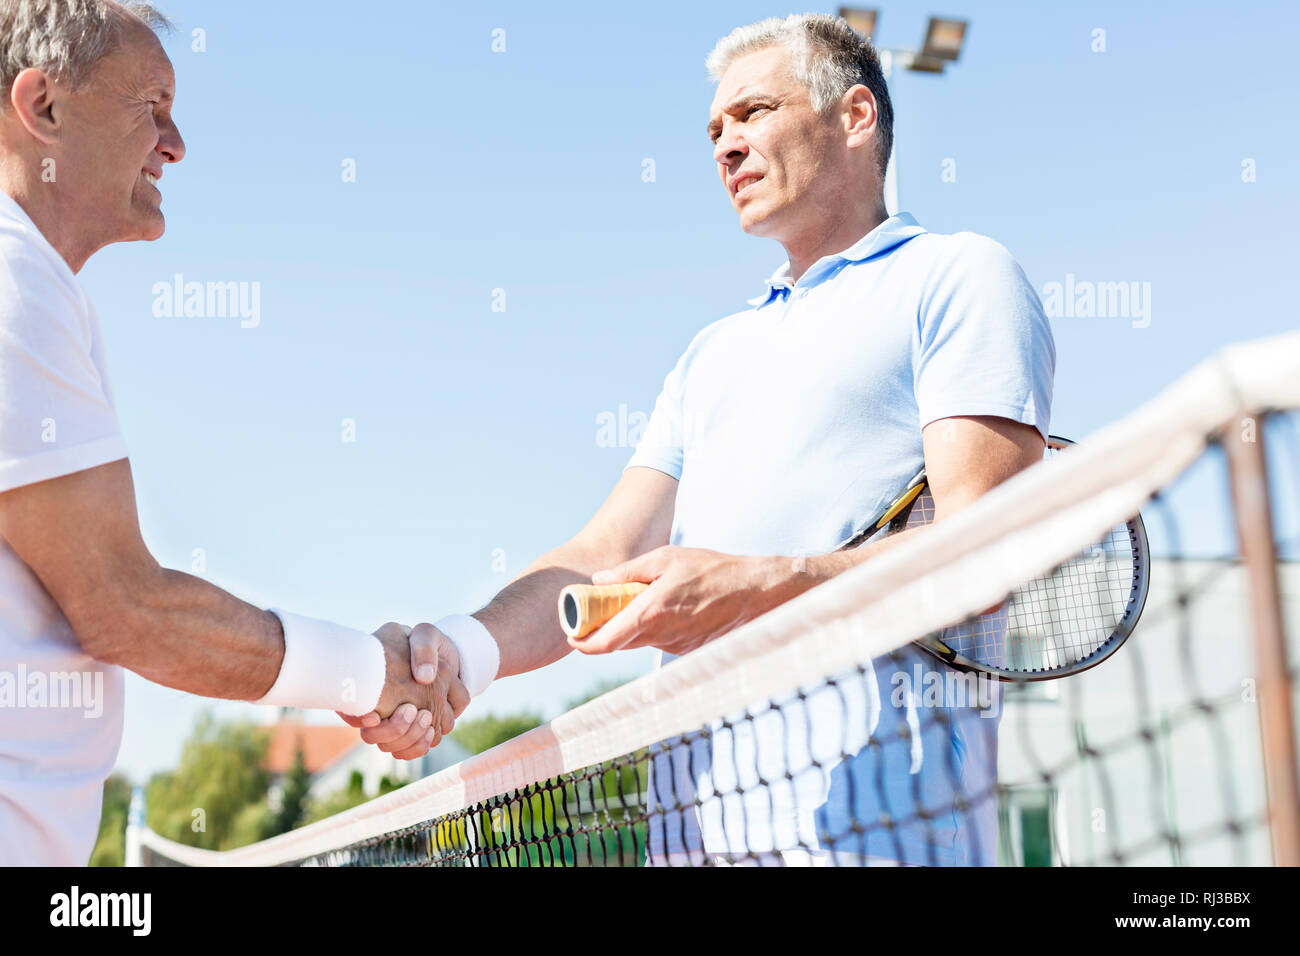 Men shaking hands while standing by tennis net against clear sky on sunny day Stock Photo